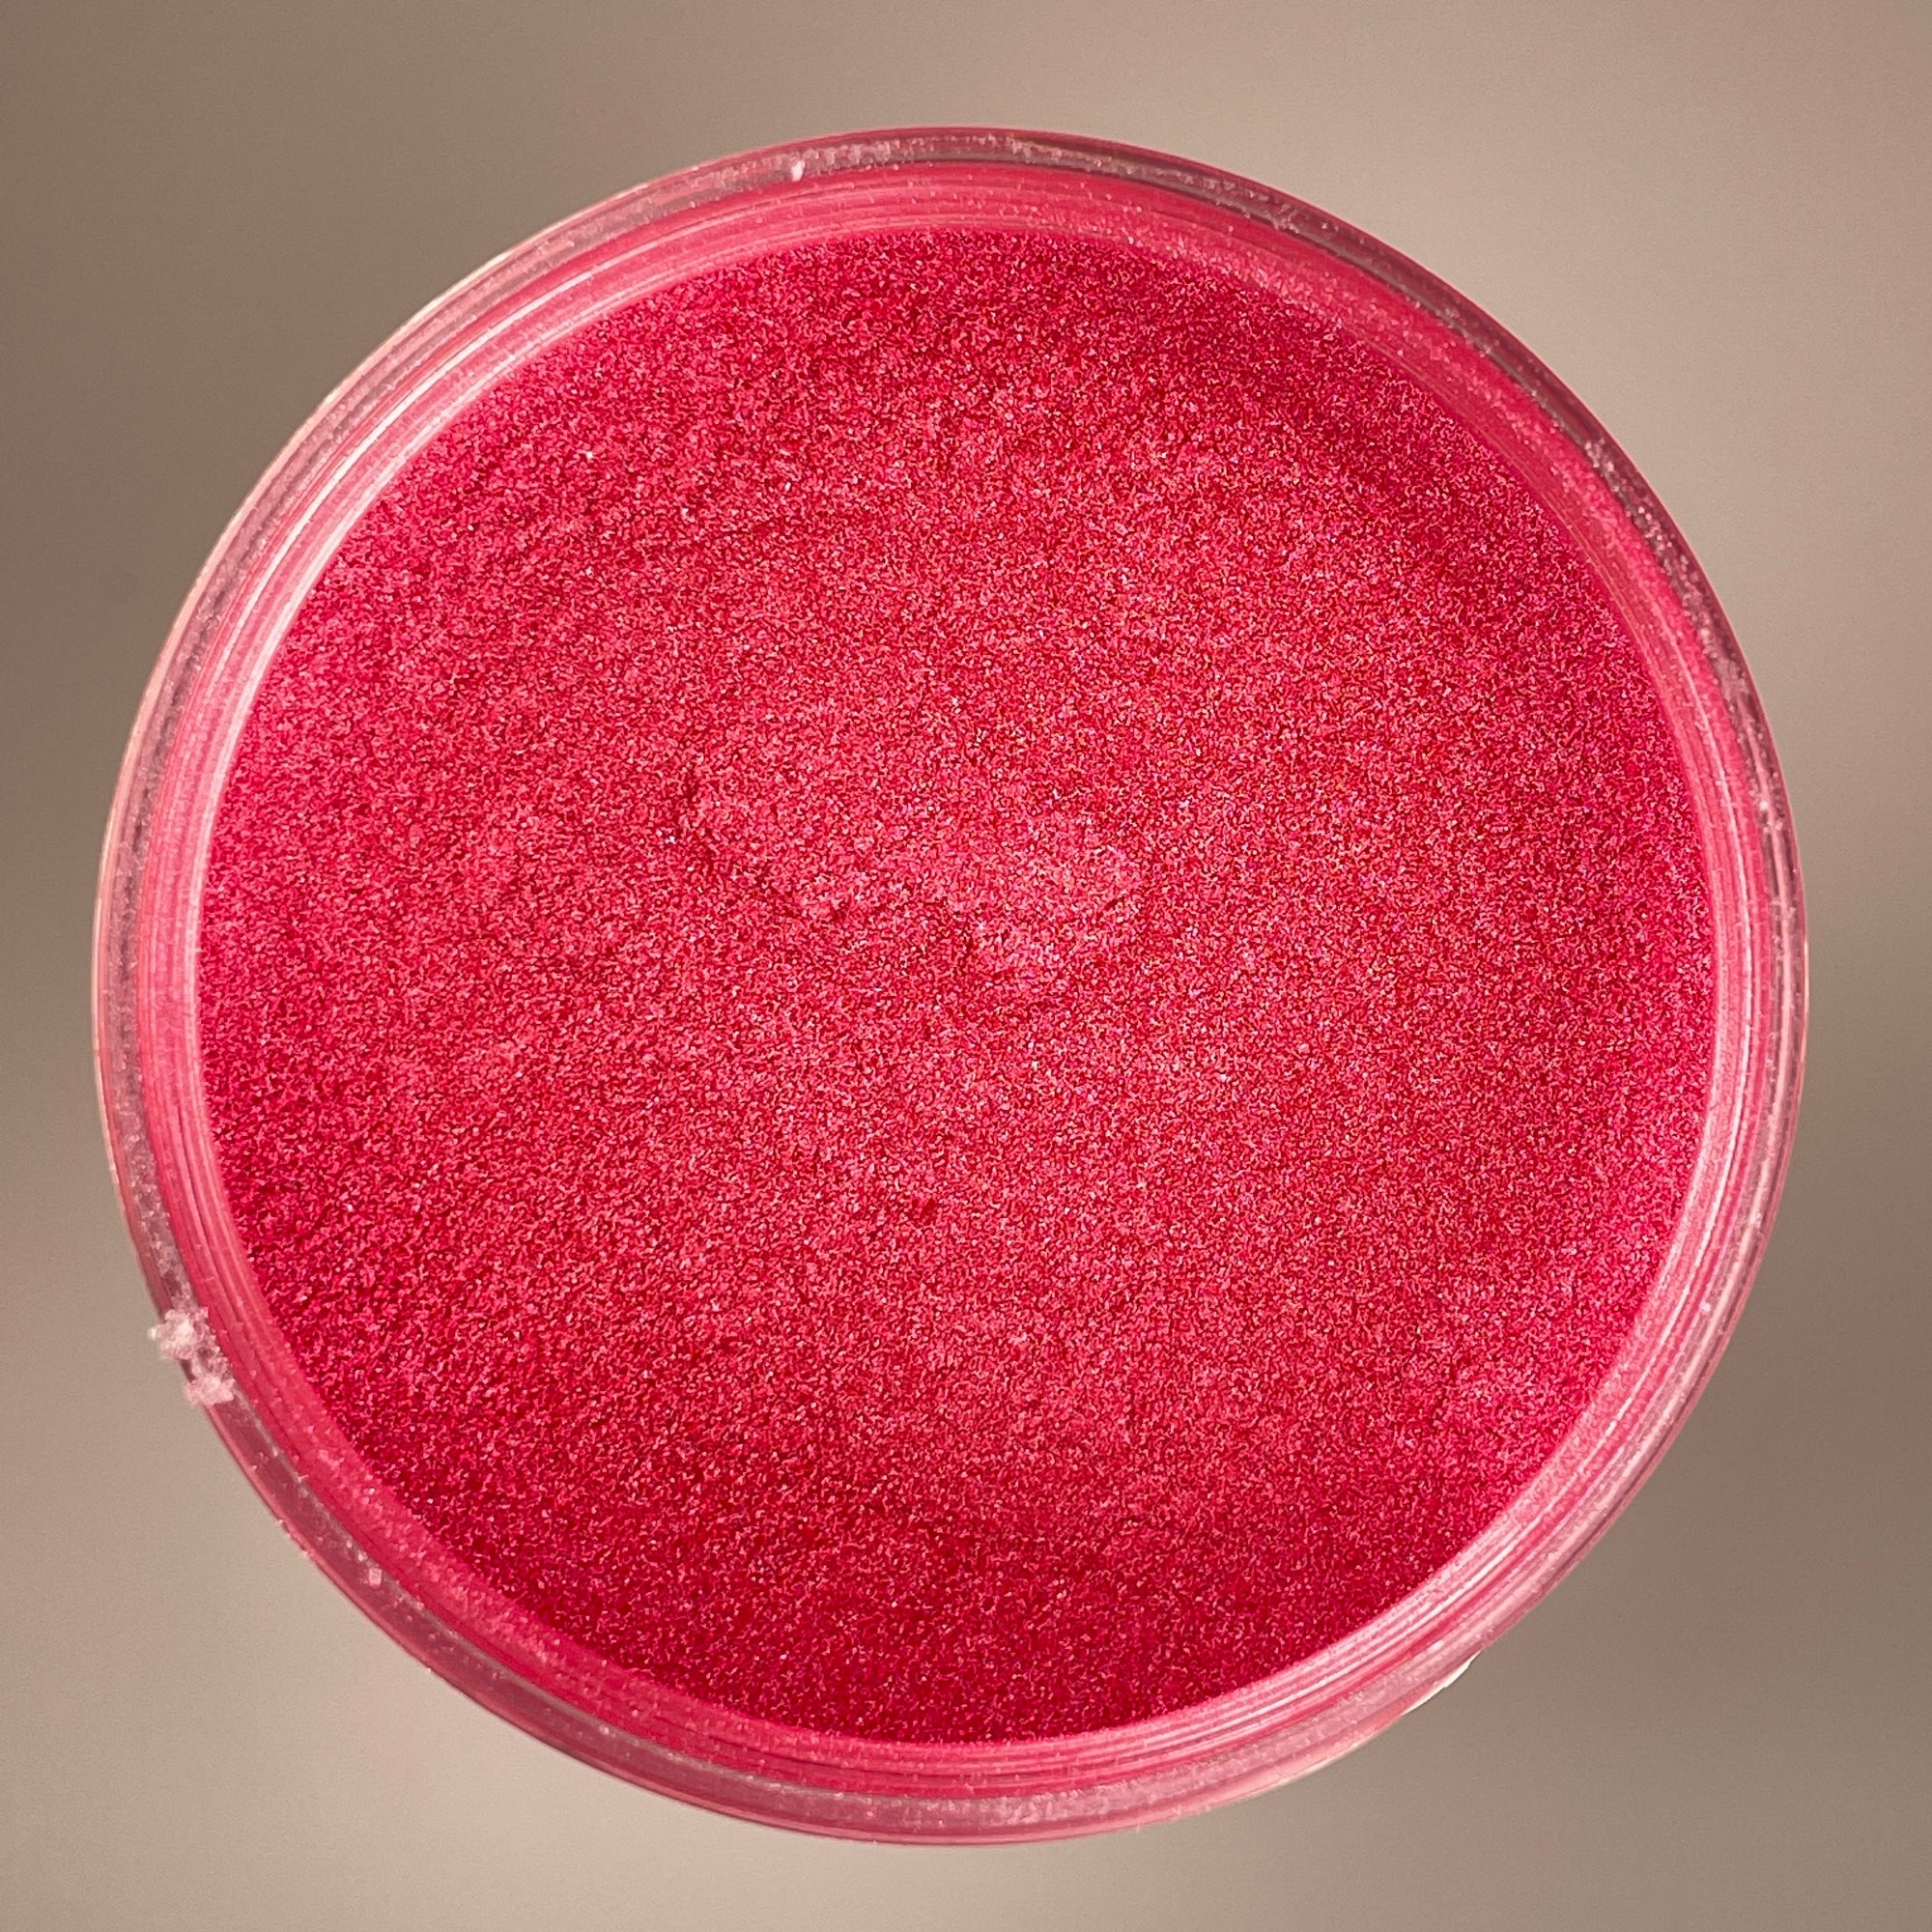 pink Radiant mica pigments for adding shine to pottery and ceramics